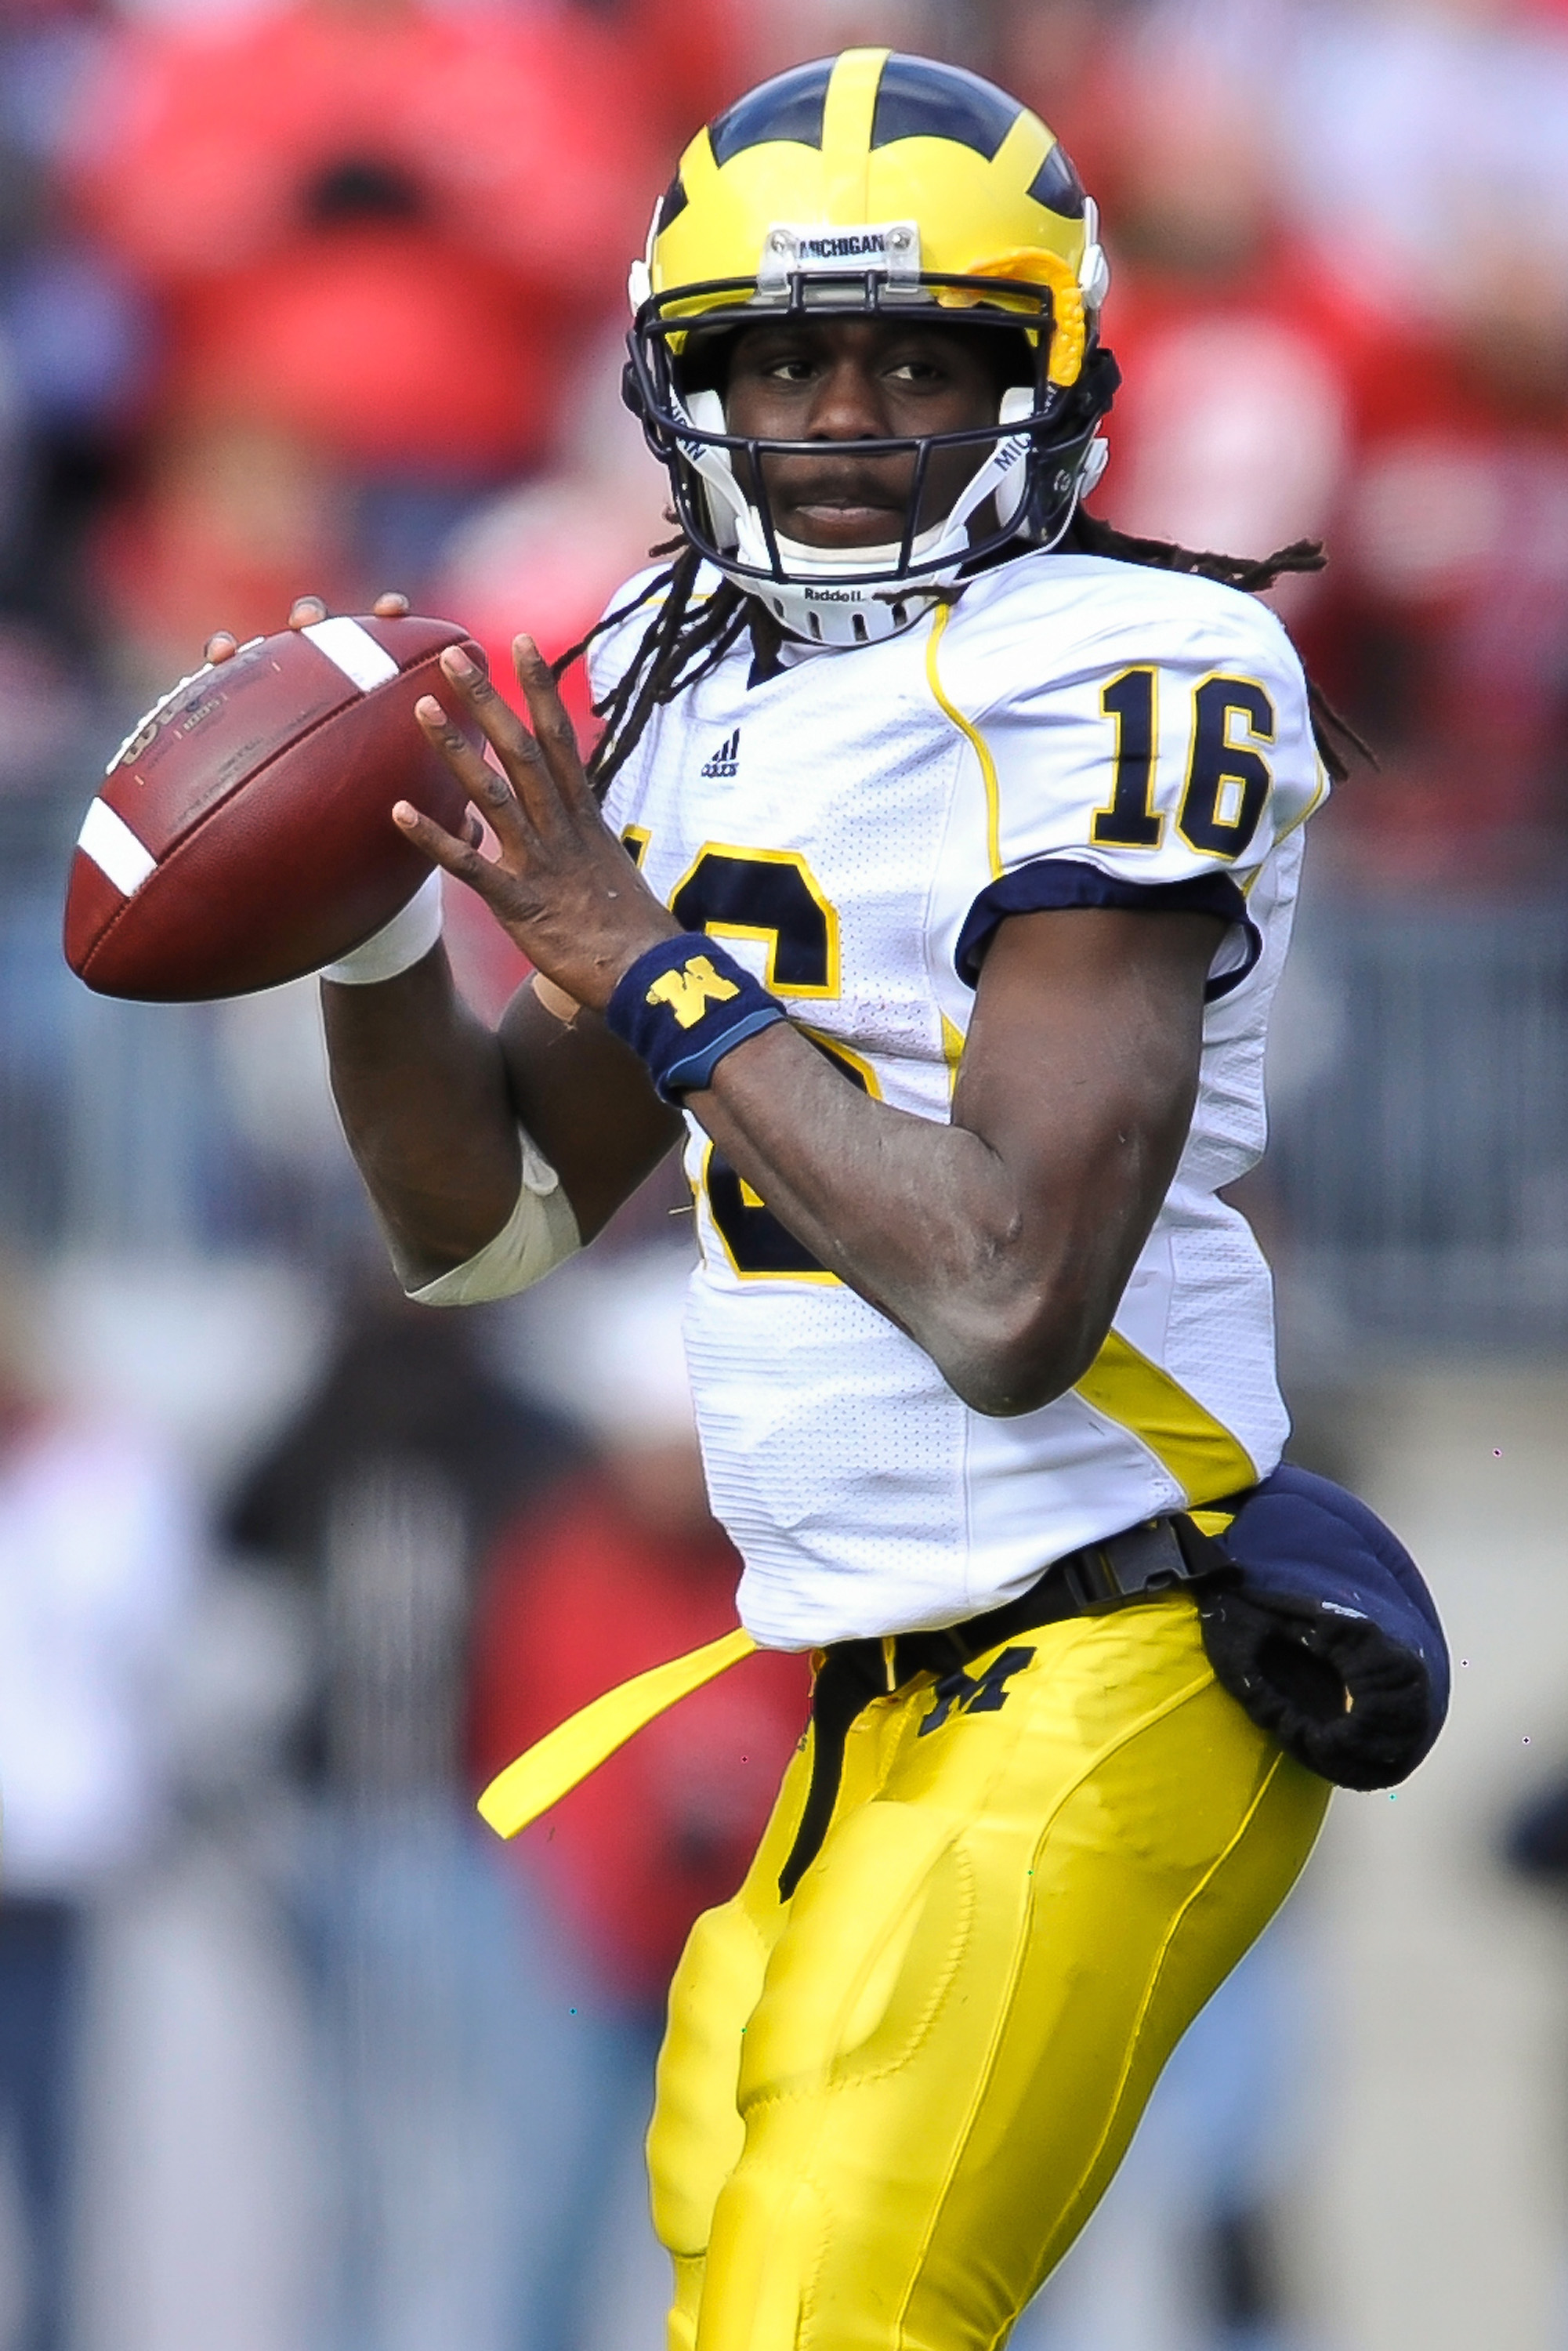 COLUMBUS, OH - NOVEMBER 27:  Quarterback Denard Robinson #16 of the Michigan Wolverines drops back to pass against the Ohio State Buckeyes at Ohio Stadium on November 27, 2010 in Columbus, Ohio.  (Photo by Jamie Sabau/Getty Images)